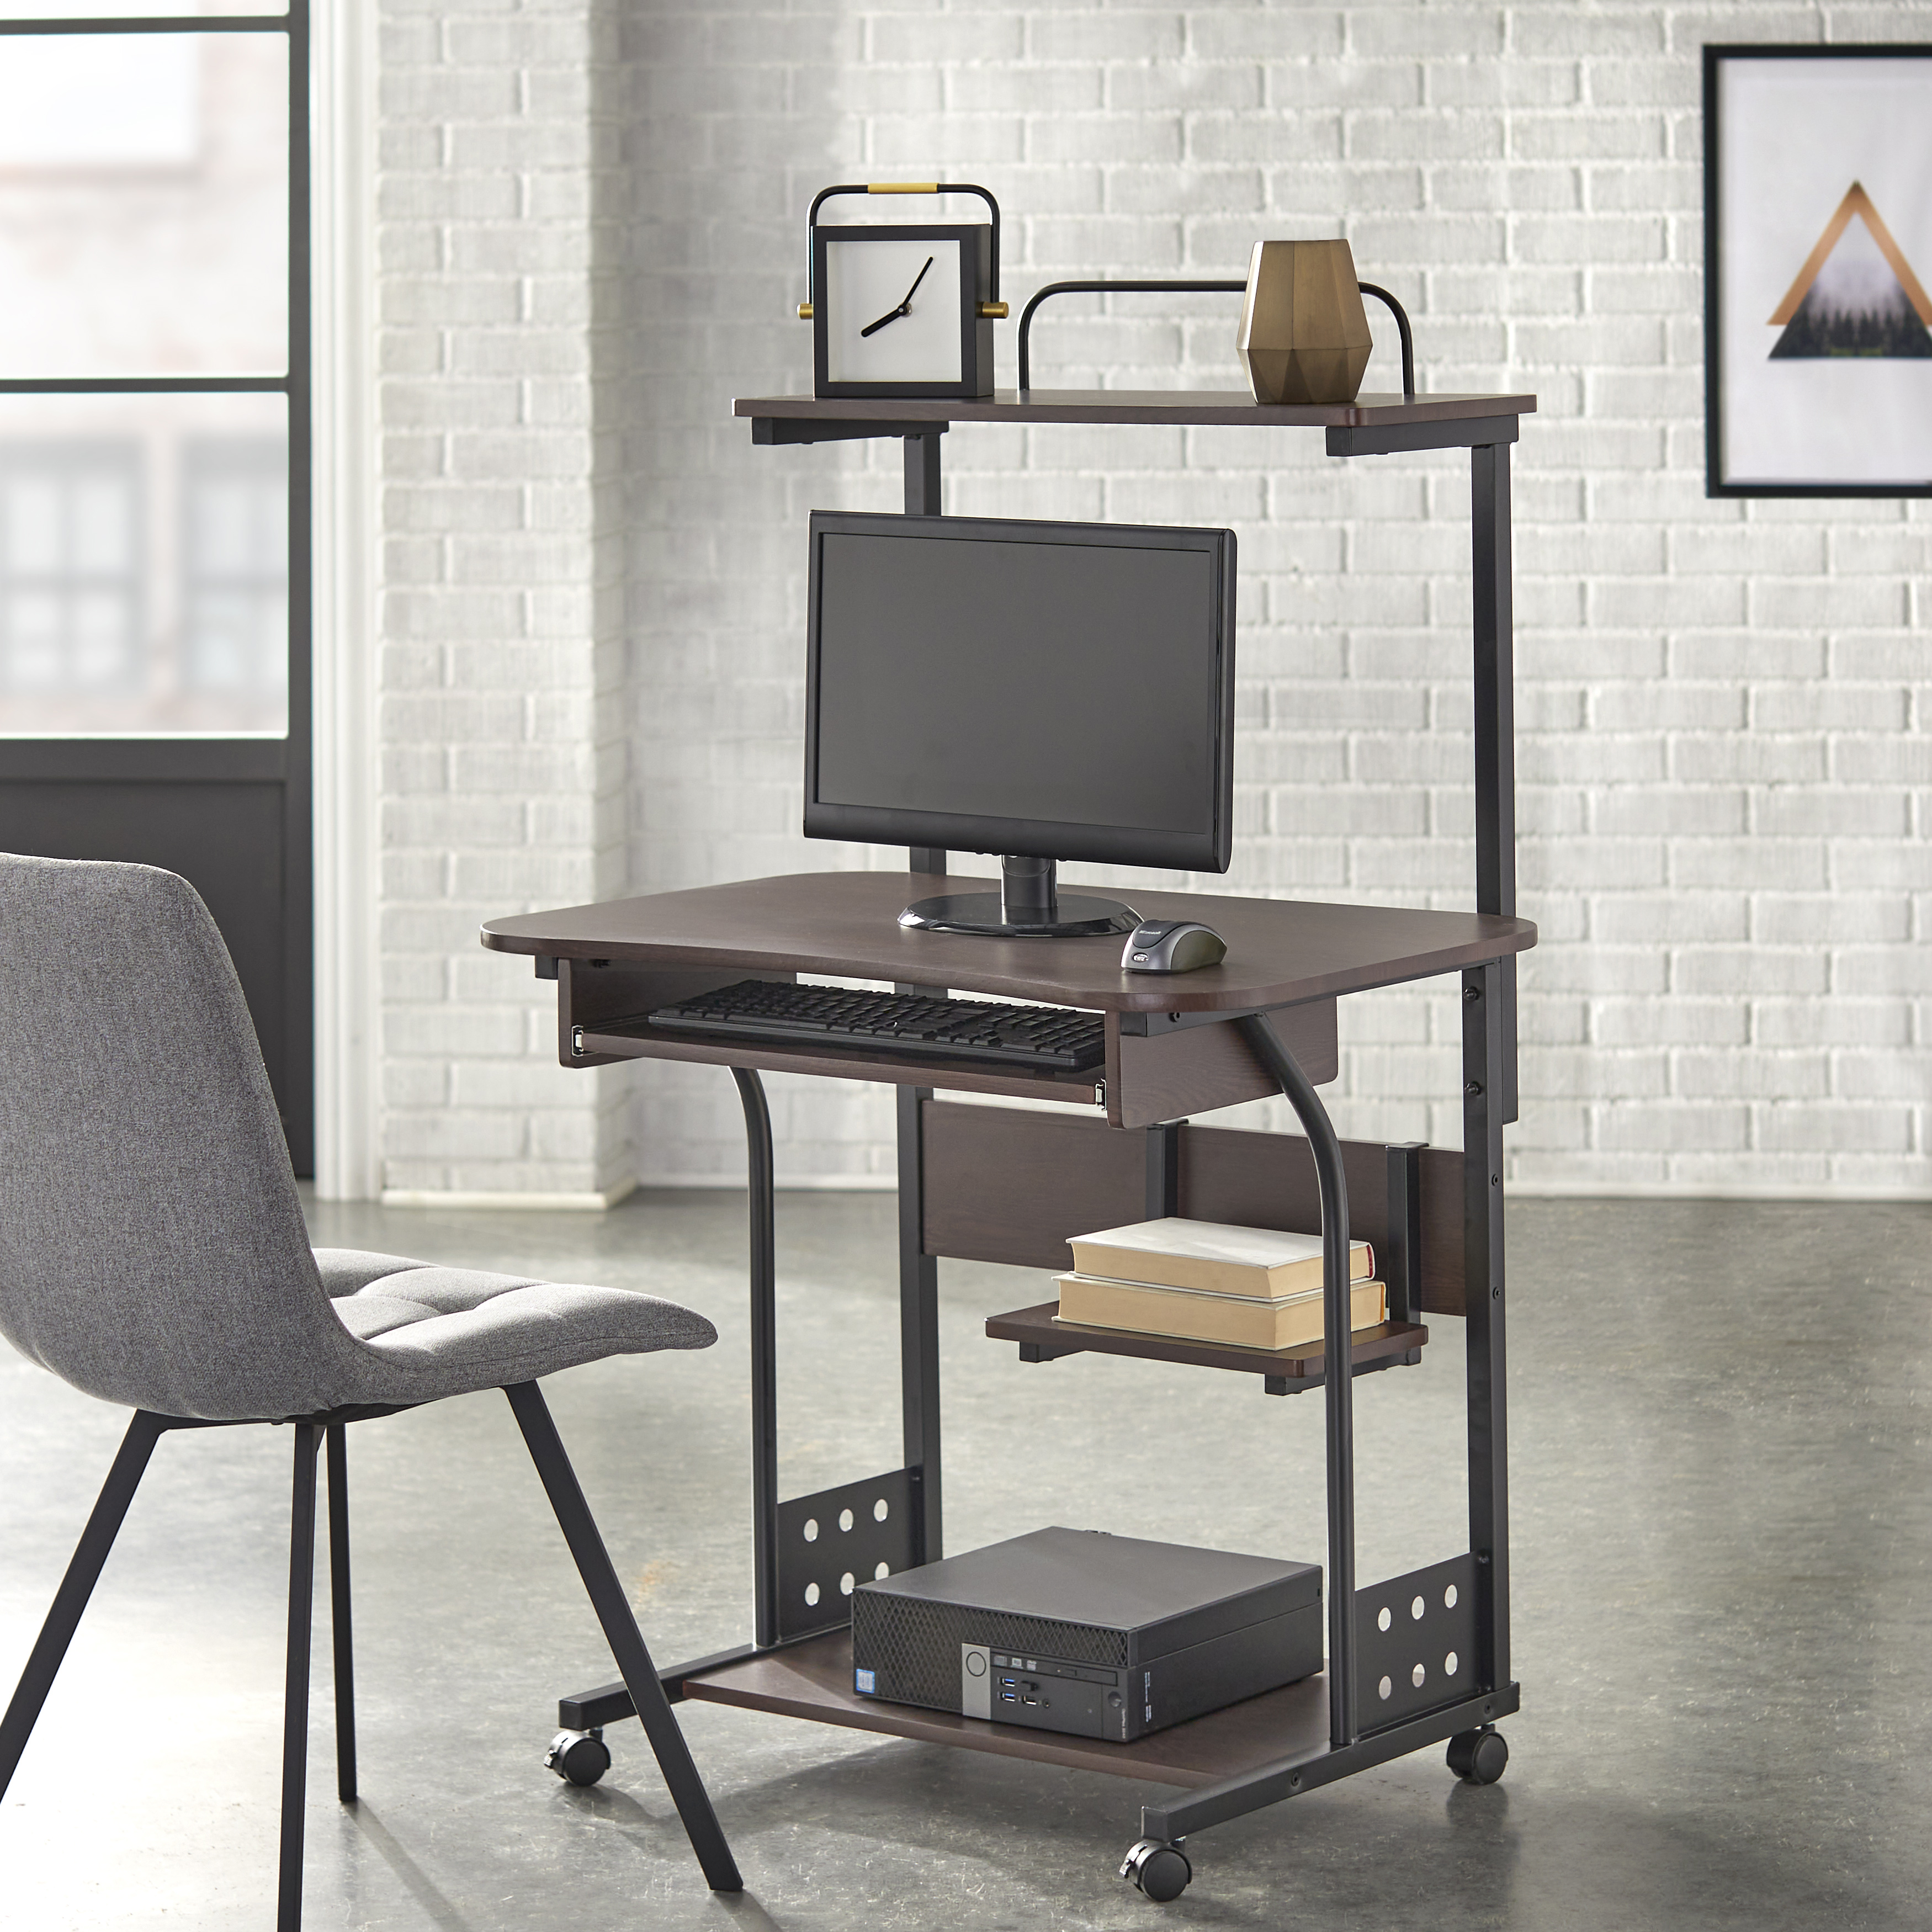 Mobile Computer Tower with Shelf, Multiple Finishes - image 1 of 3